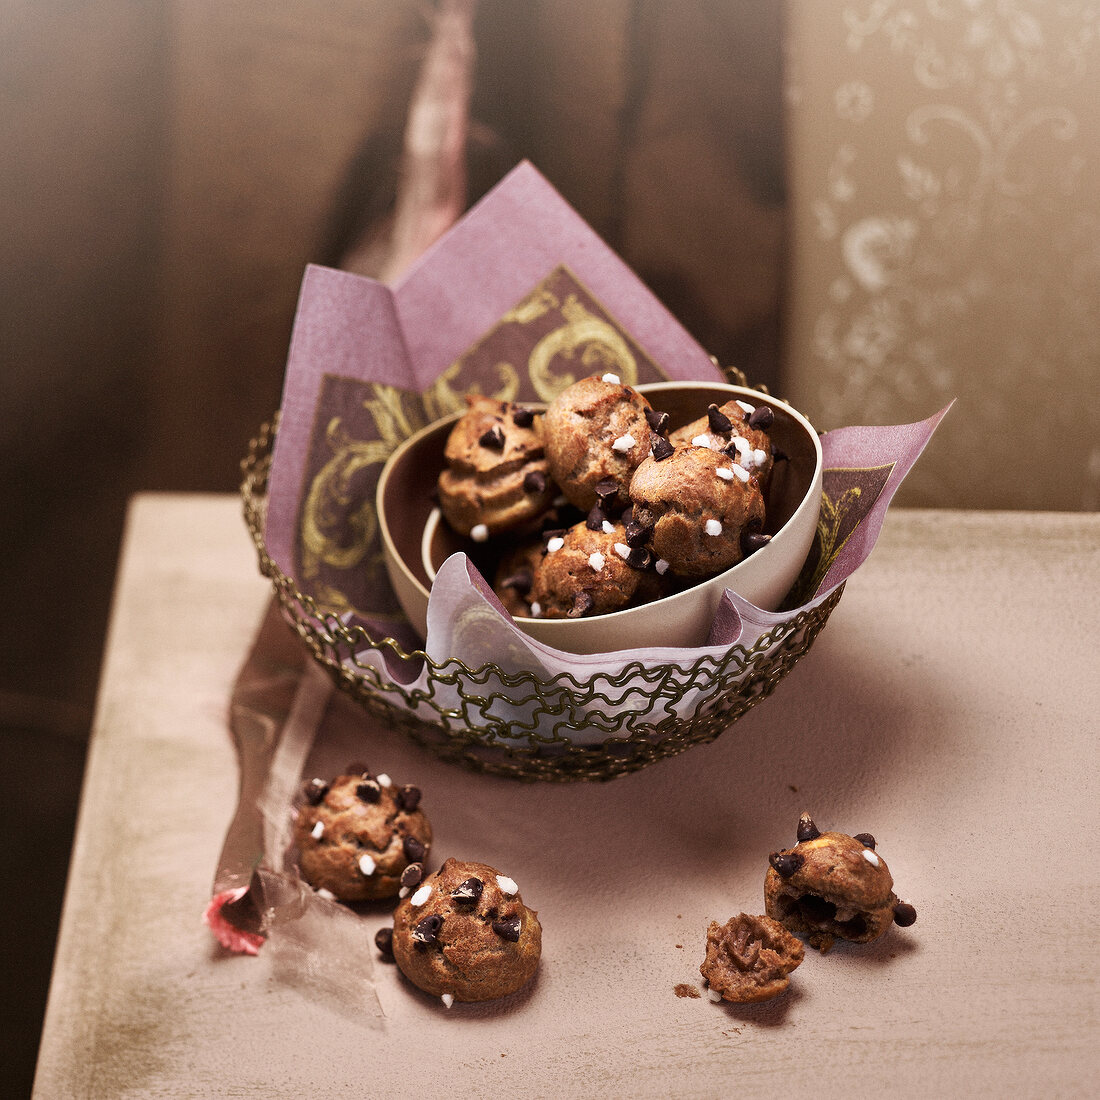 Chocolate and sugar Chouquettes